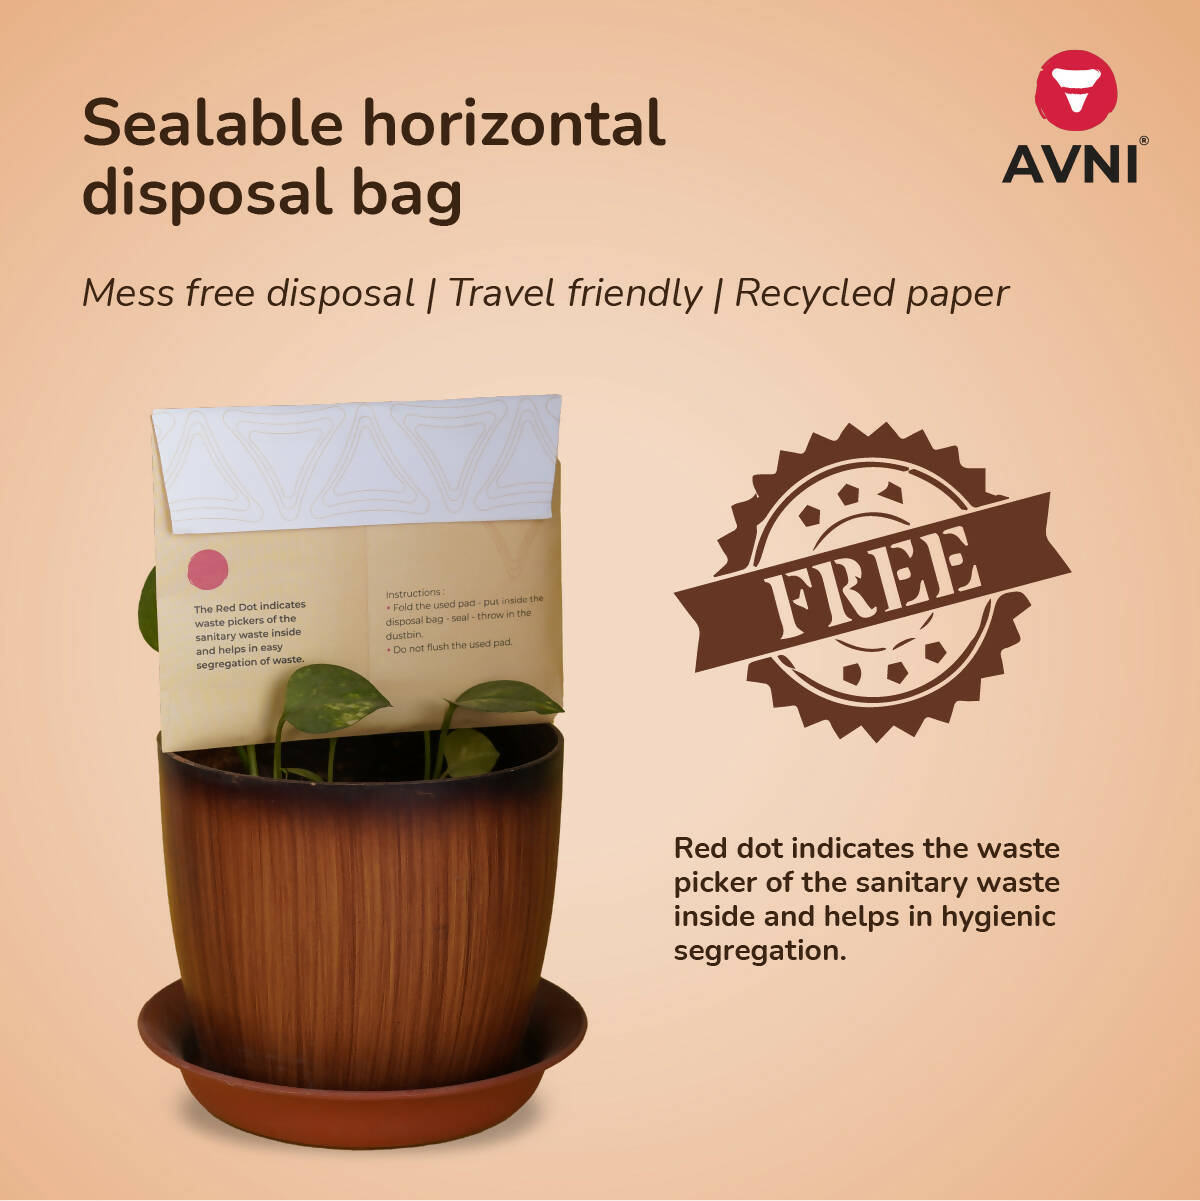 Avni Natural Cotton 240MM Sanitary Pads (R, Pack of 24 ) with Paper Disposal Bags | Low flow Wemy Store